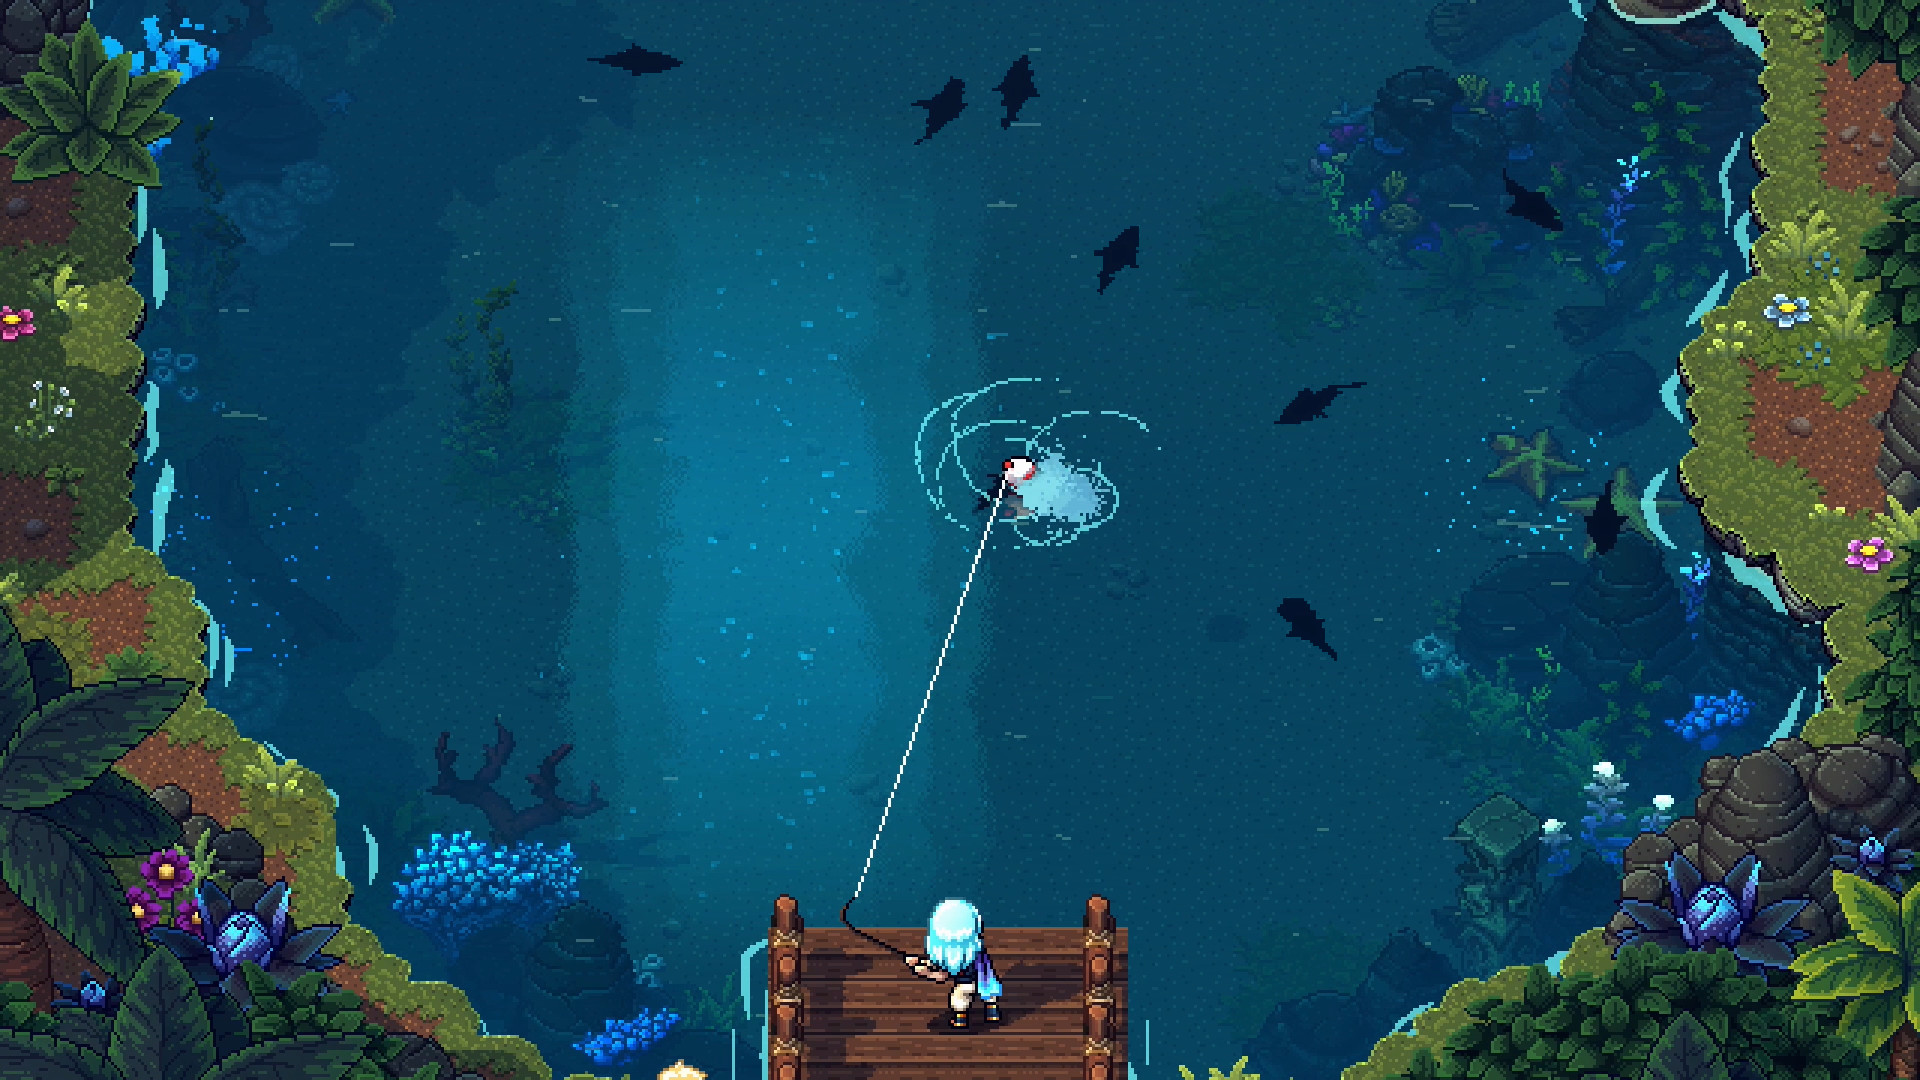 Sea of Stars] Awesome game <3. If you want to know how to get the